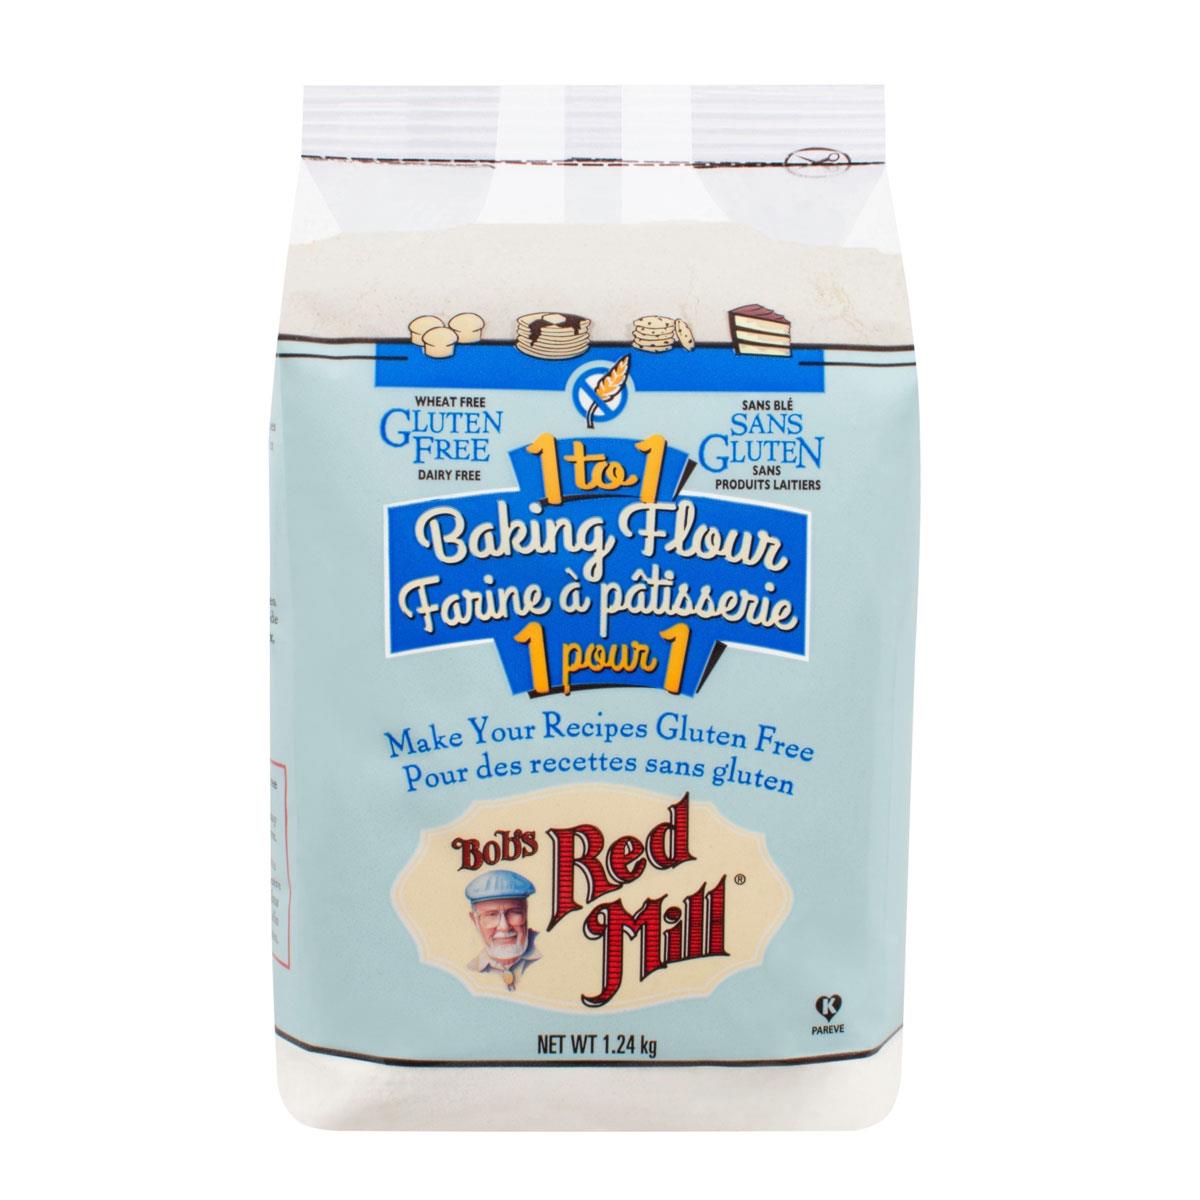 Bob's Red Mill Baking Flour (1 to 1) - 1.24 kg